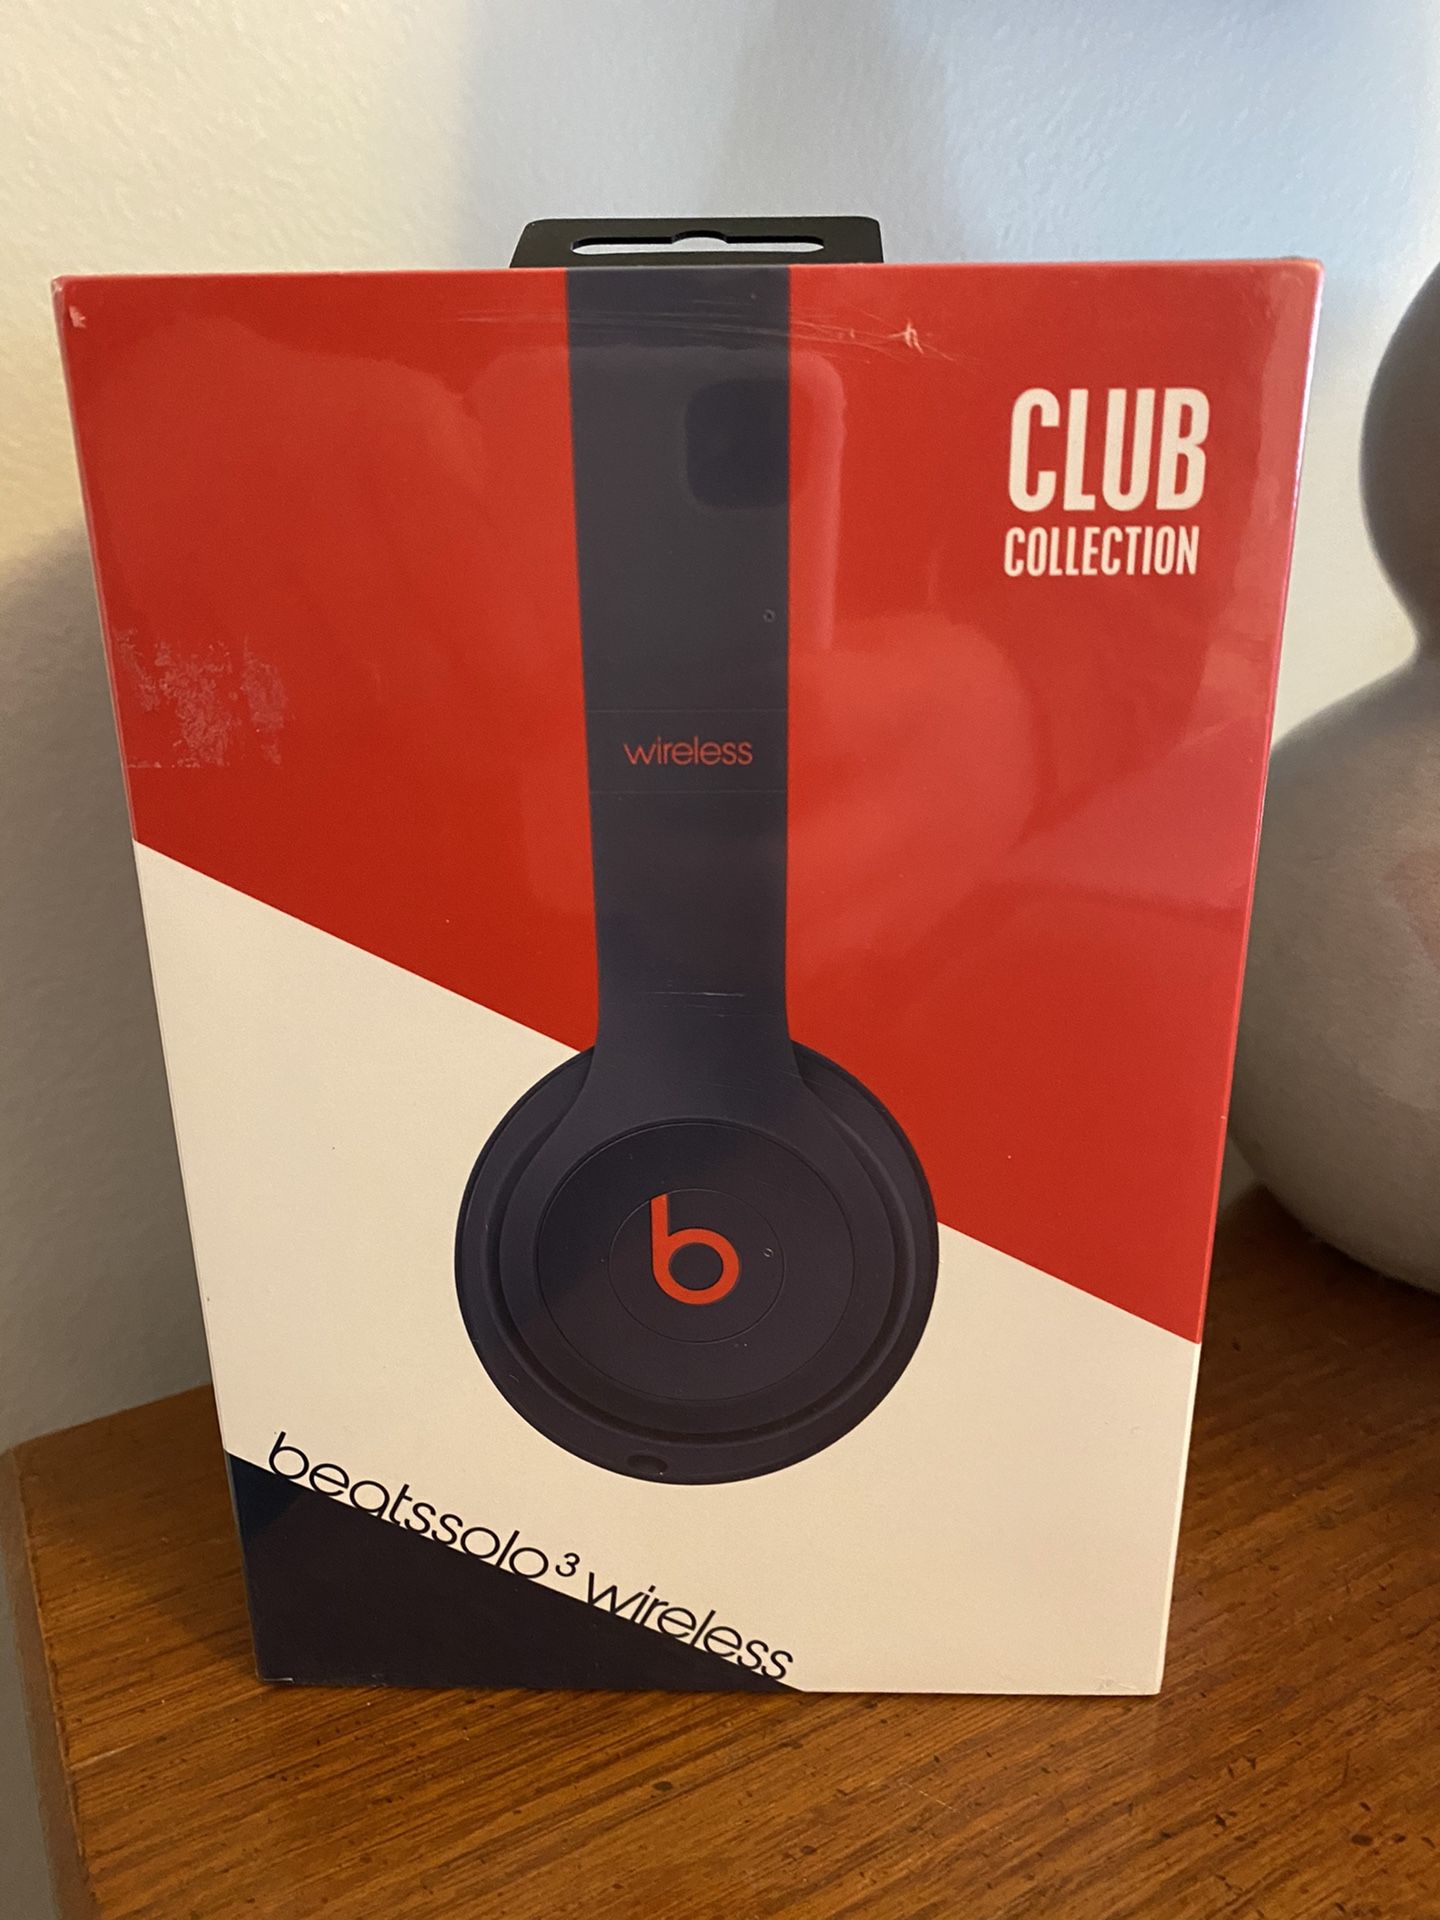 NEVER OPENED - Beats Solo 3 Wireless CLUB Collection Navy Blue